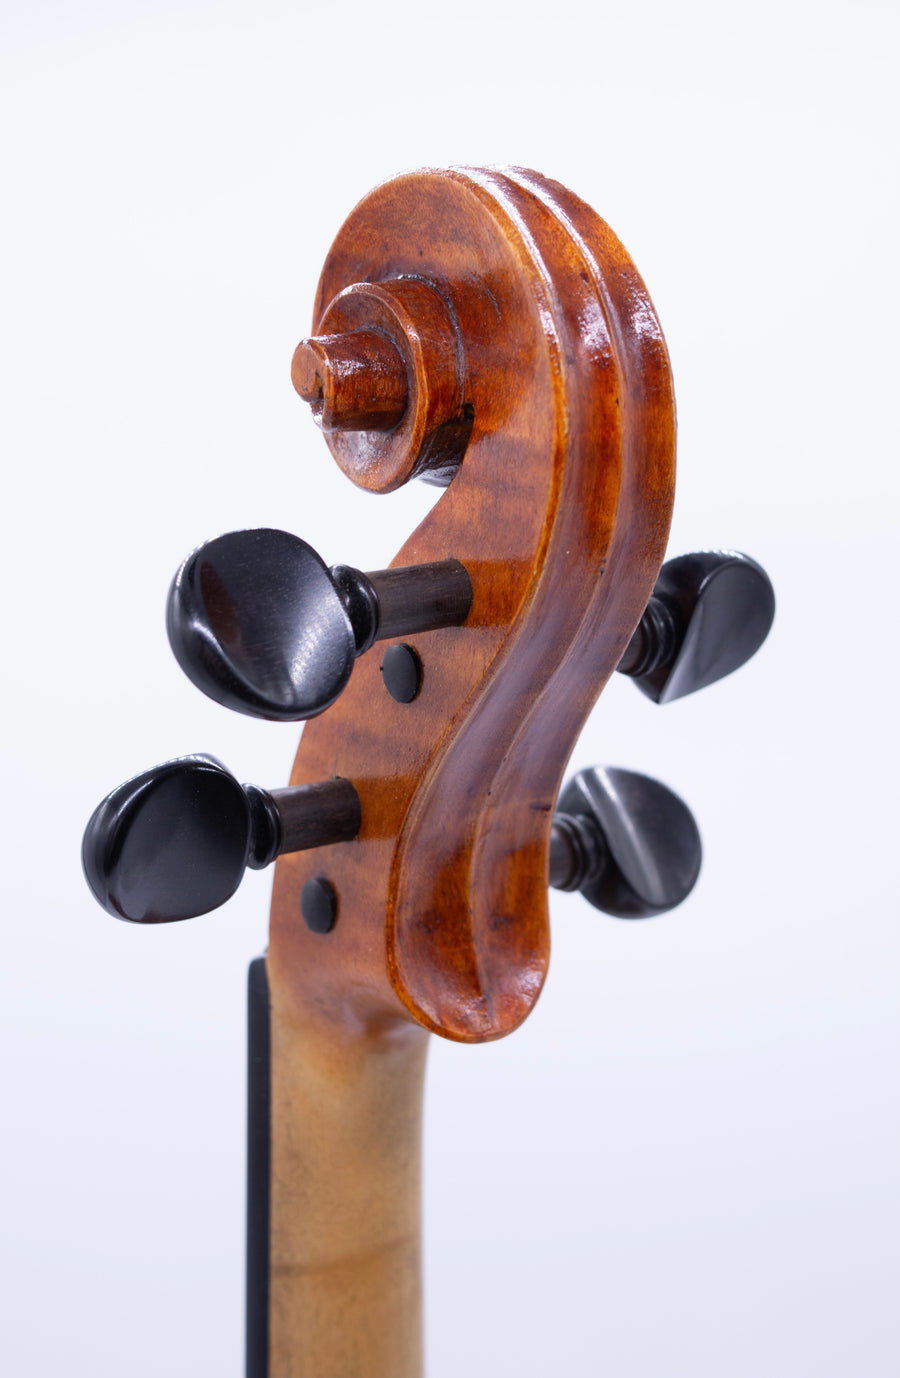 A Contemporary American Viola By Todd Goldenberg, 2014. 16 1/4.”